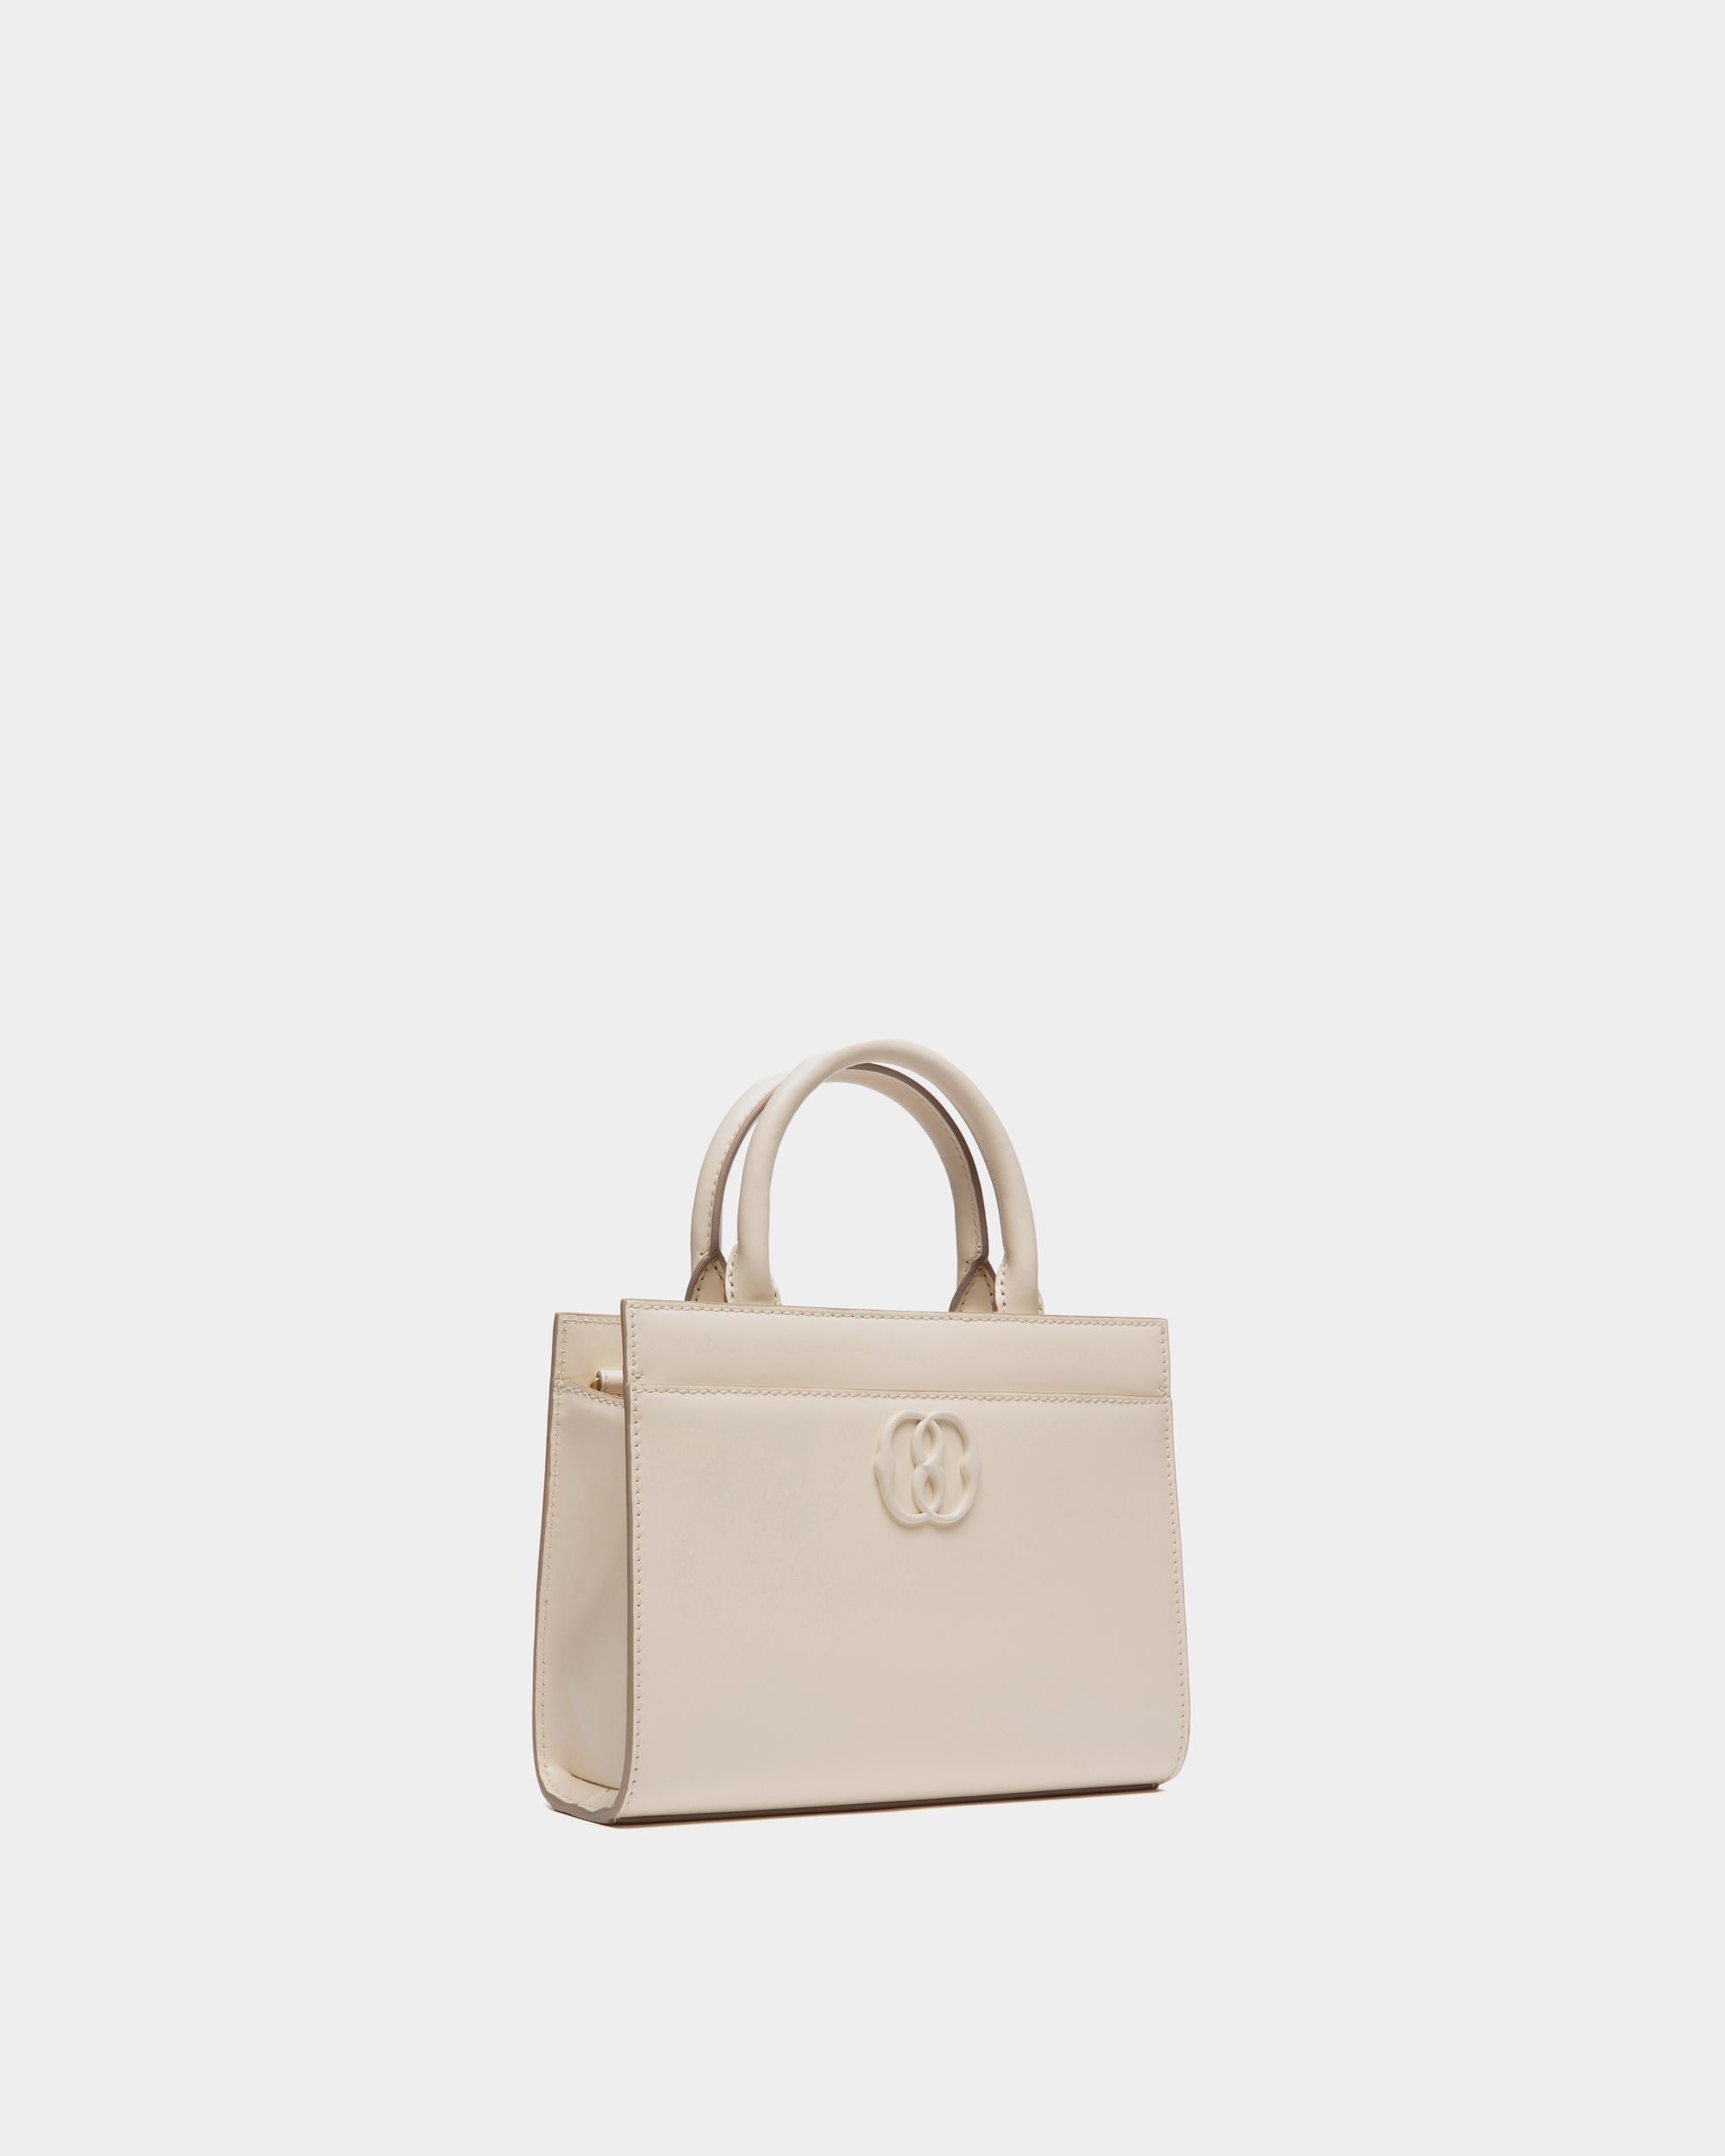 Emblem | Women's Small Tote Bag in White Brushed Leather | Bally | Still Life 3/4 Front